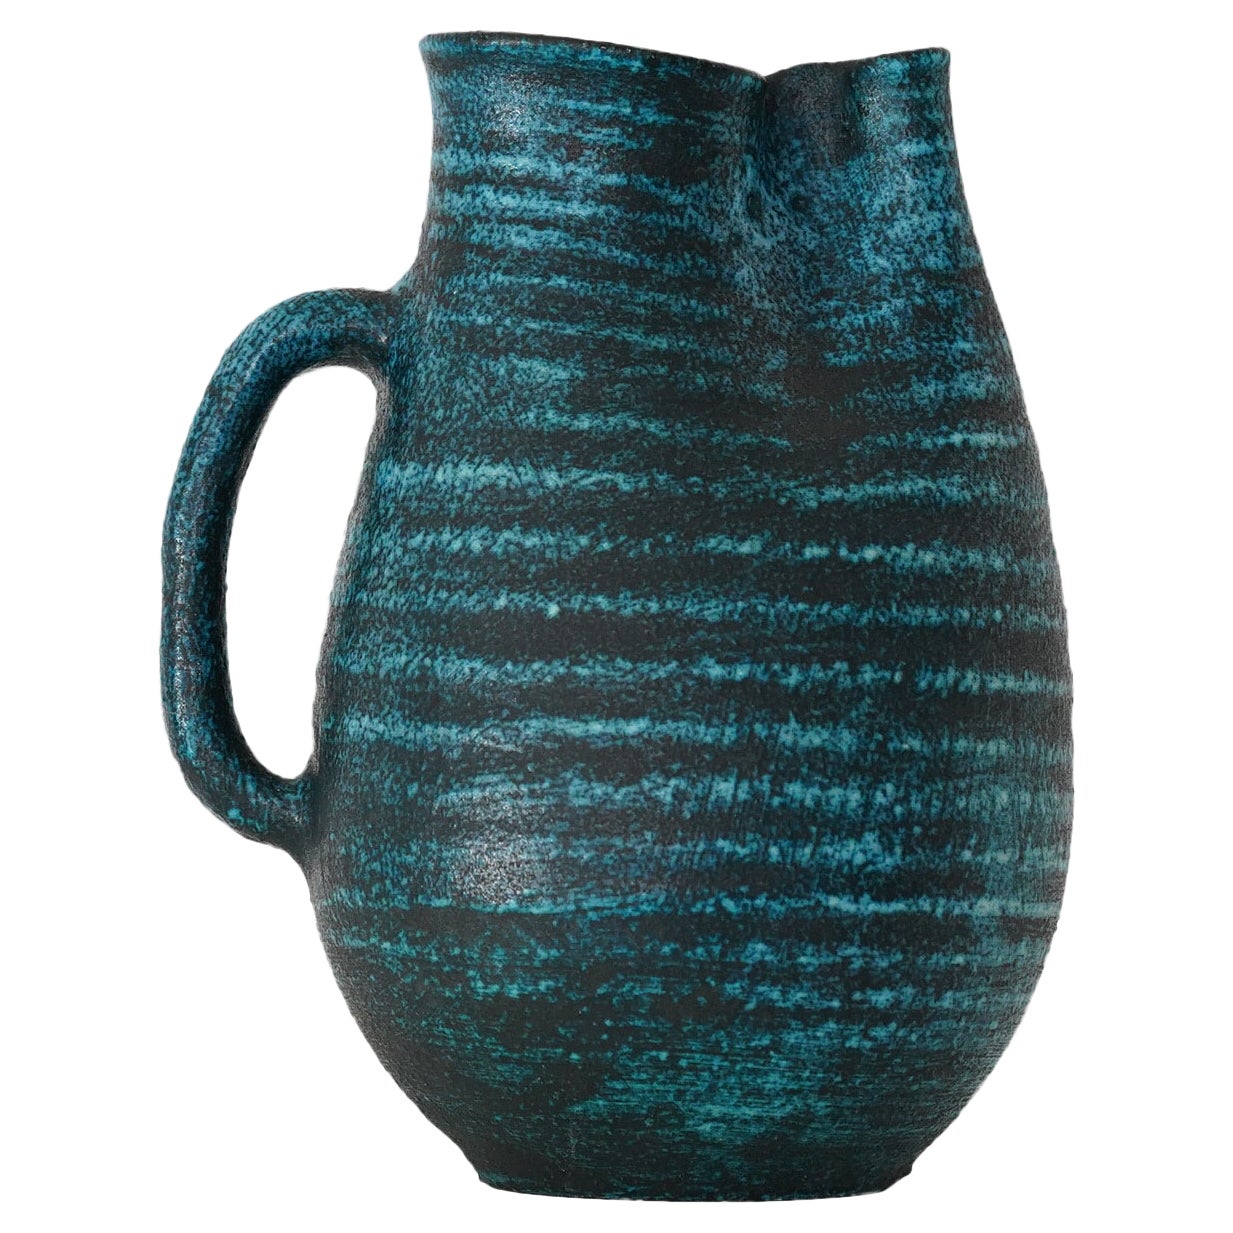 Accolay Freeform Blue Ceramic Pitcher, France 1950s For Sale